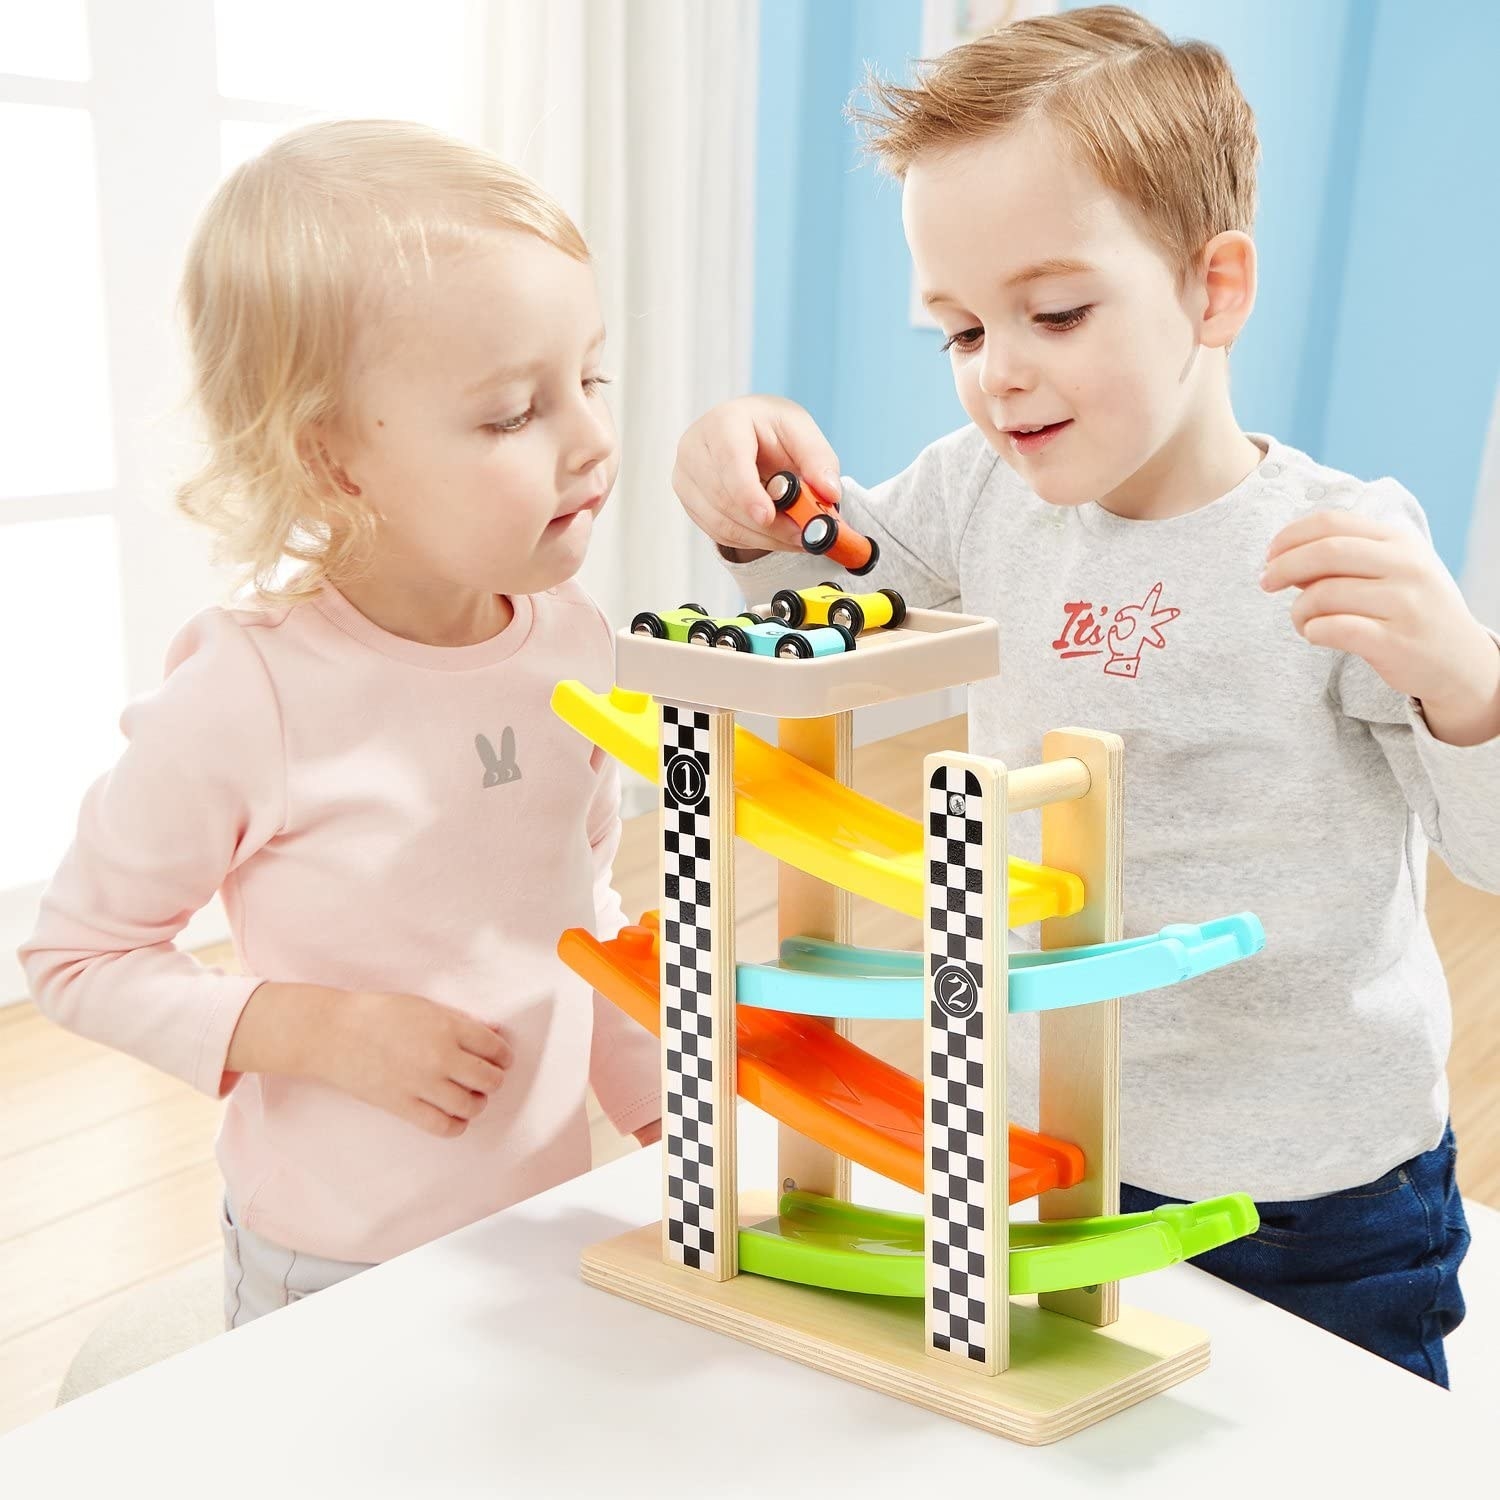 Two kids playing with a wooden race car set